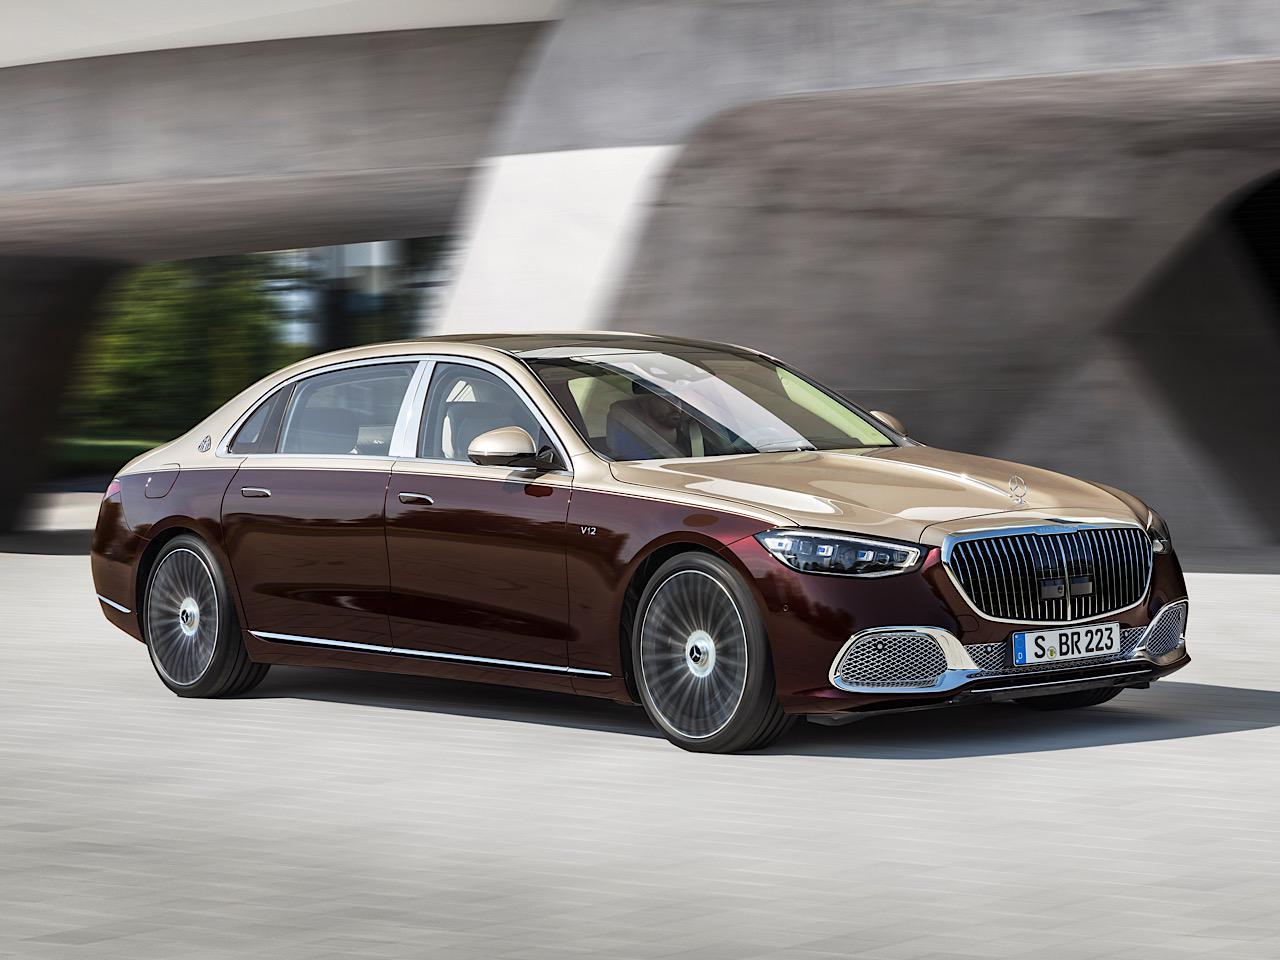 The 2022 Mercedes-Maybach S 680 4Matic Sedan goes on sale in 2022